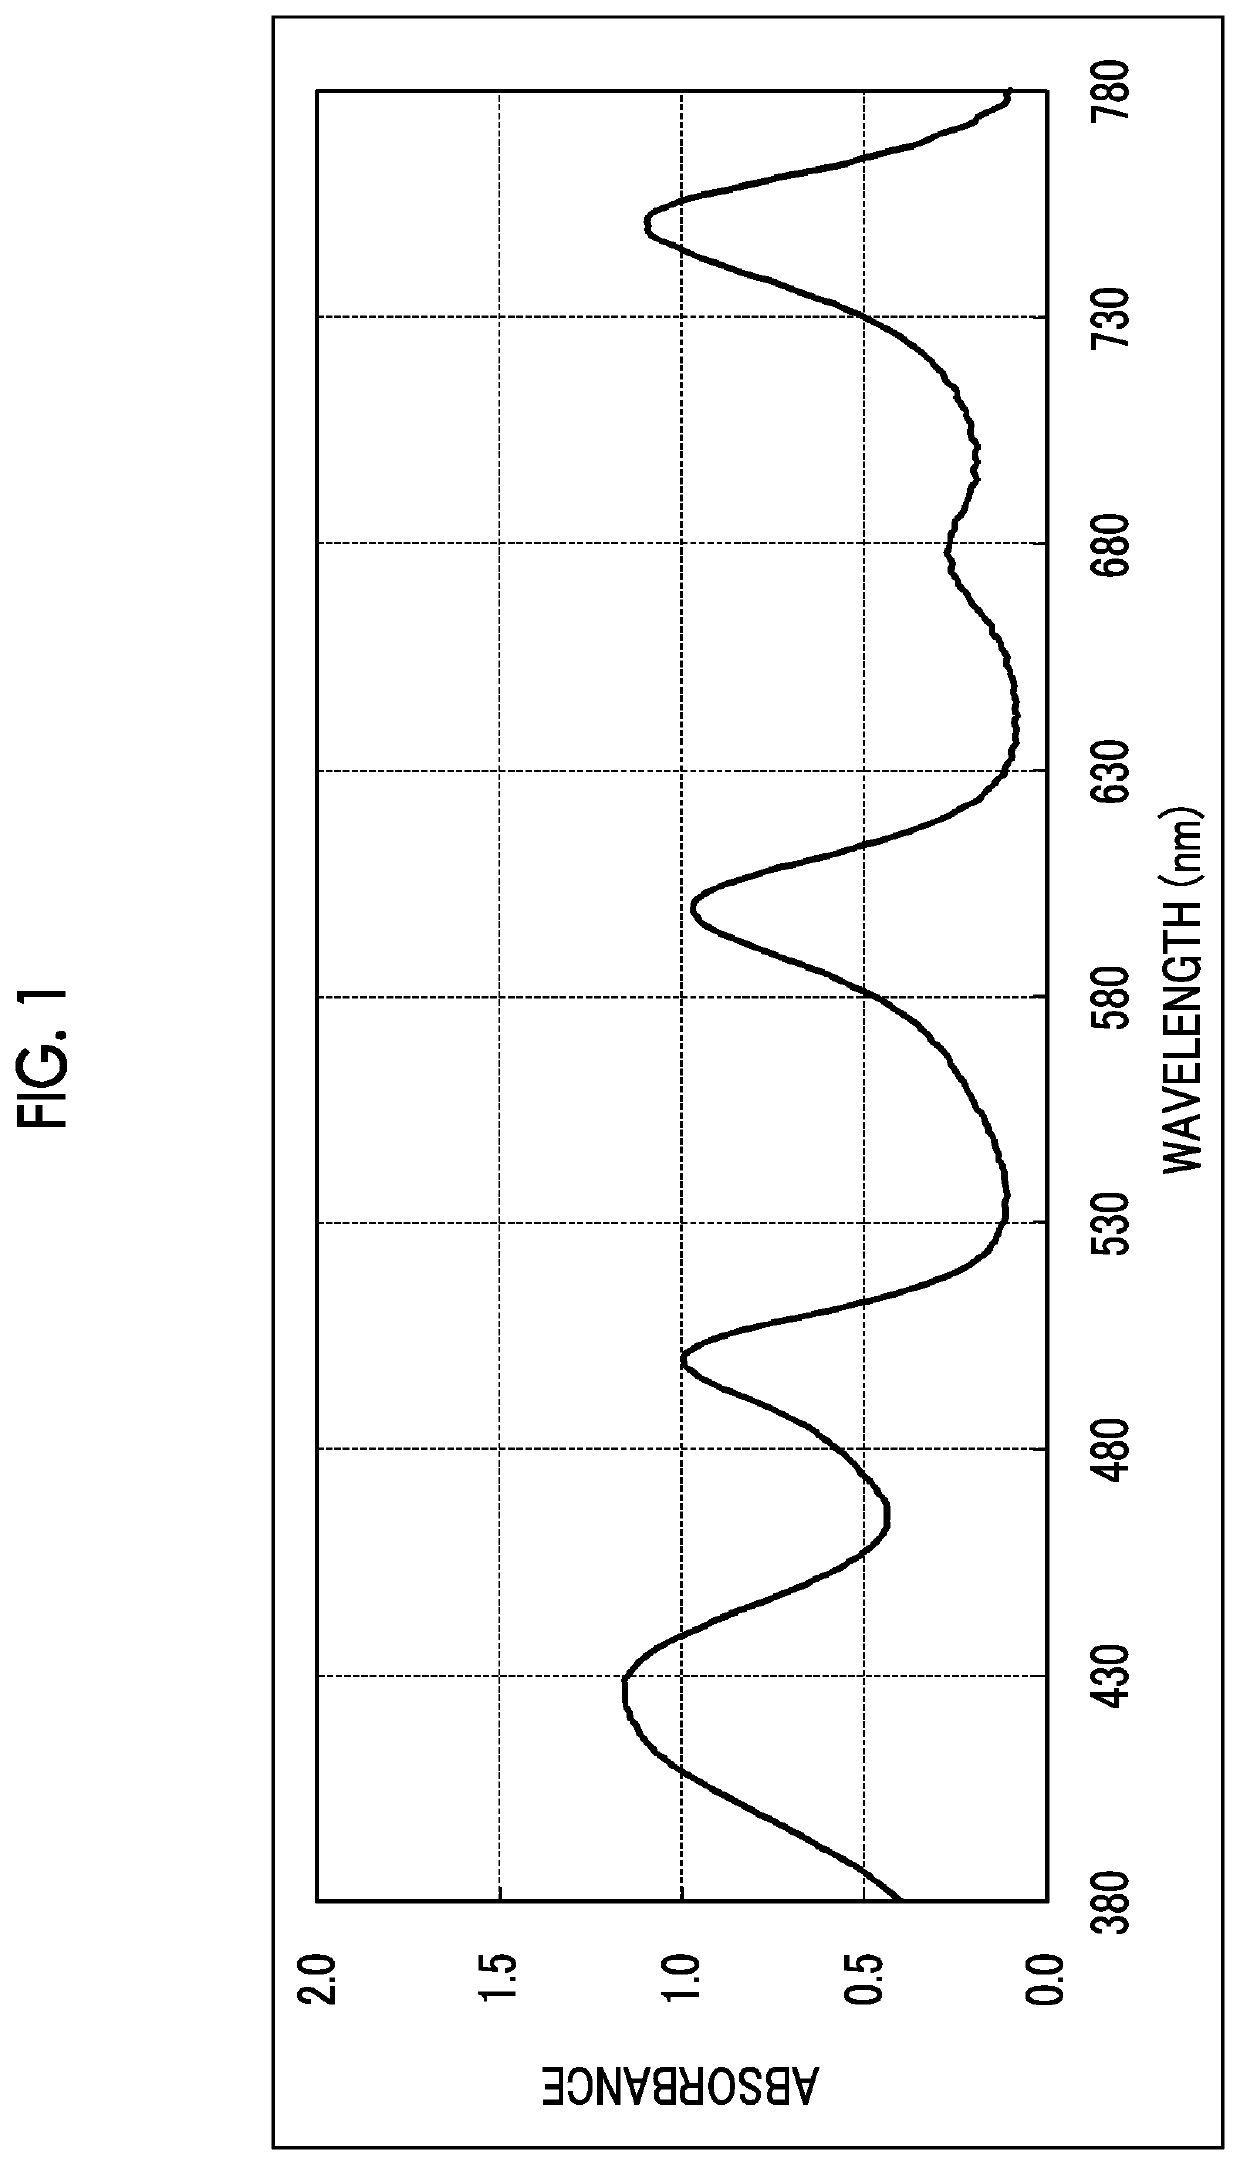 Wavelength selective absorption filter and organic electroluminescent display device